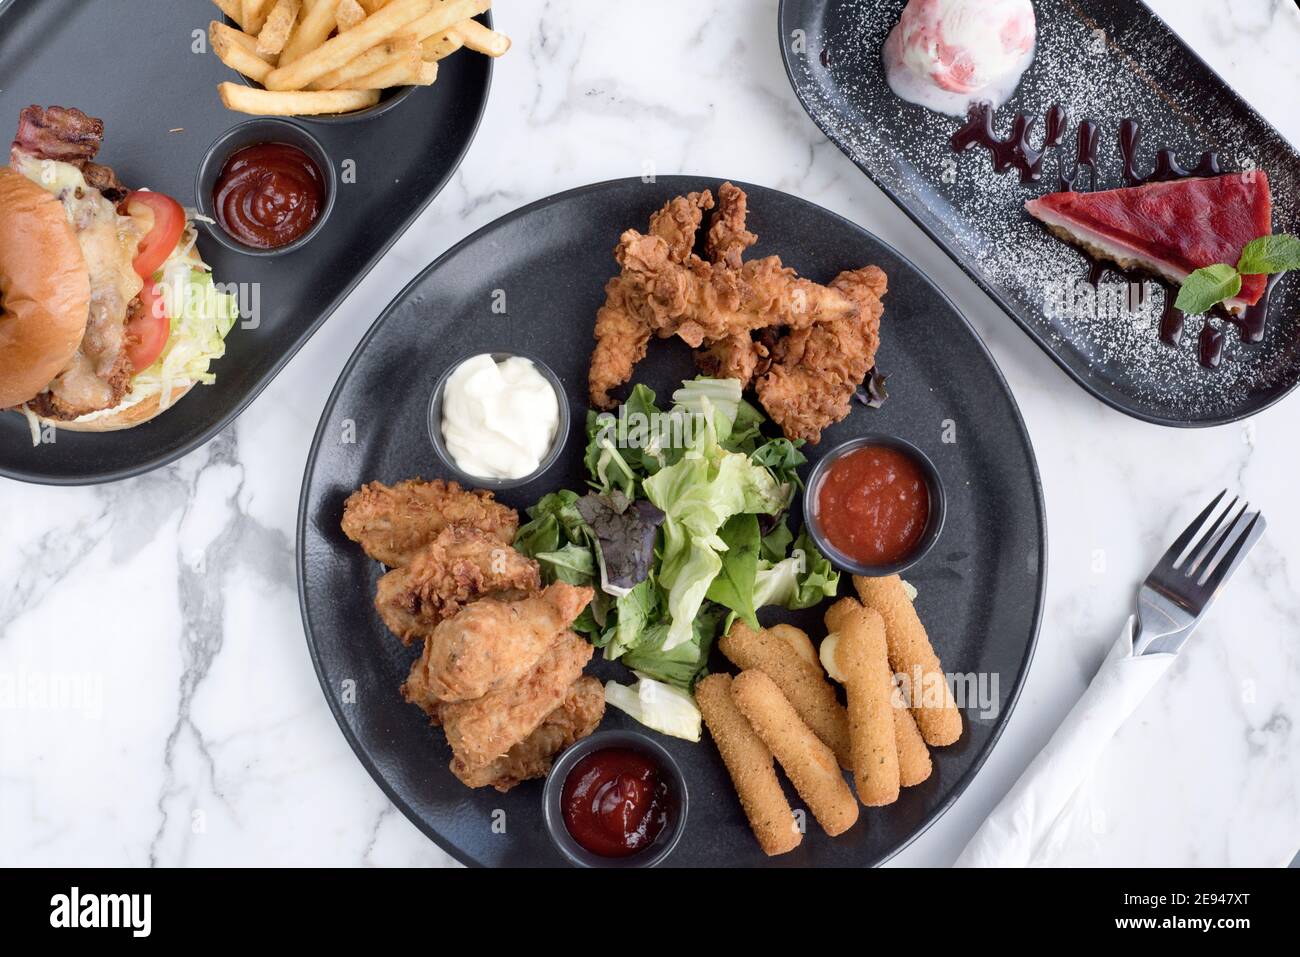 Sheffield, UK - 03 Aug 2017: Southern fried chicken, mozarrella sicks share platter, cheeseburger and fries and cheesecake at OHM, Fitzwilliam Street Stock Photo